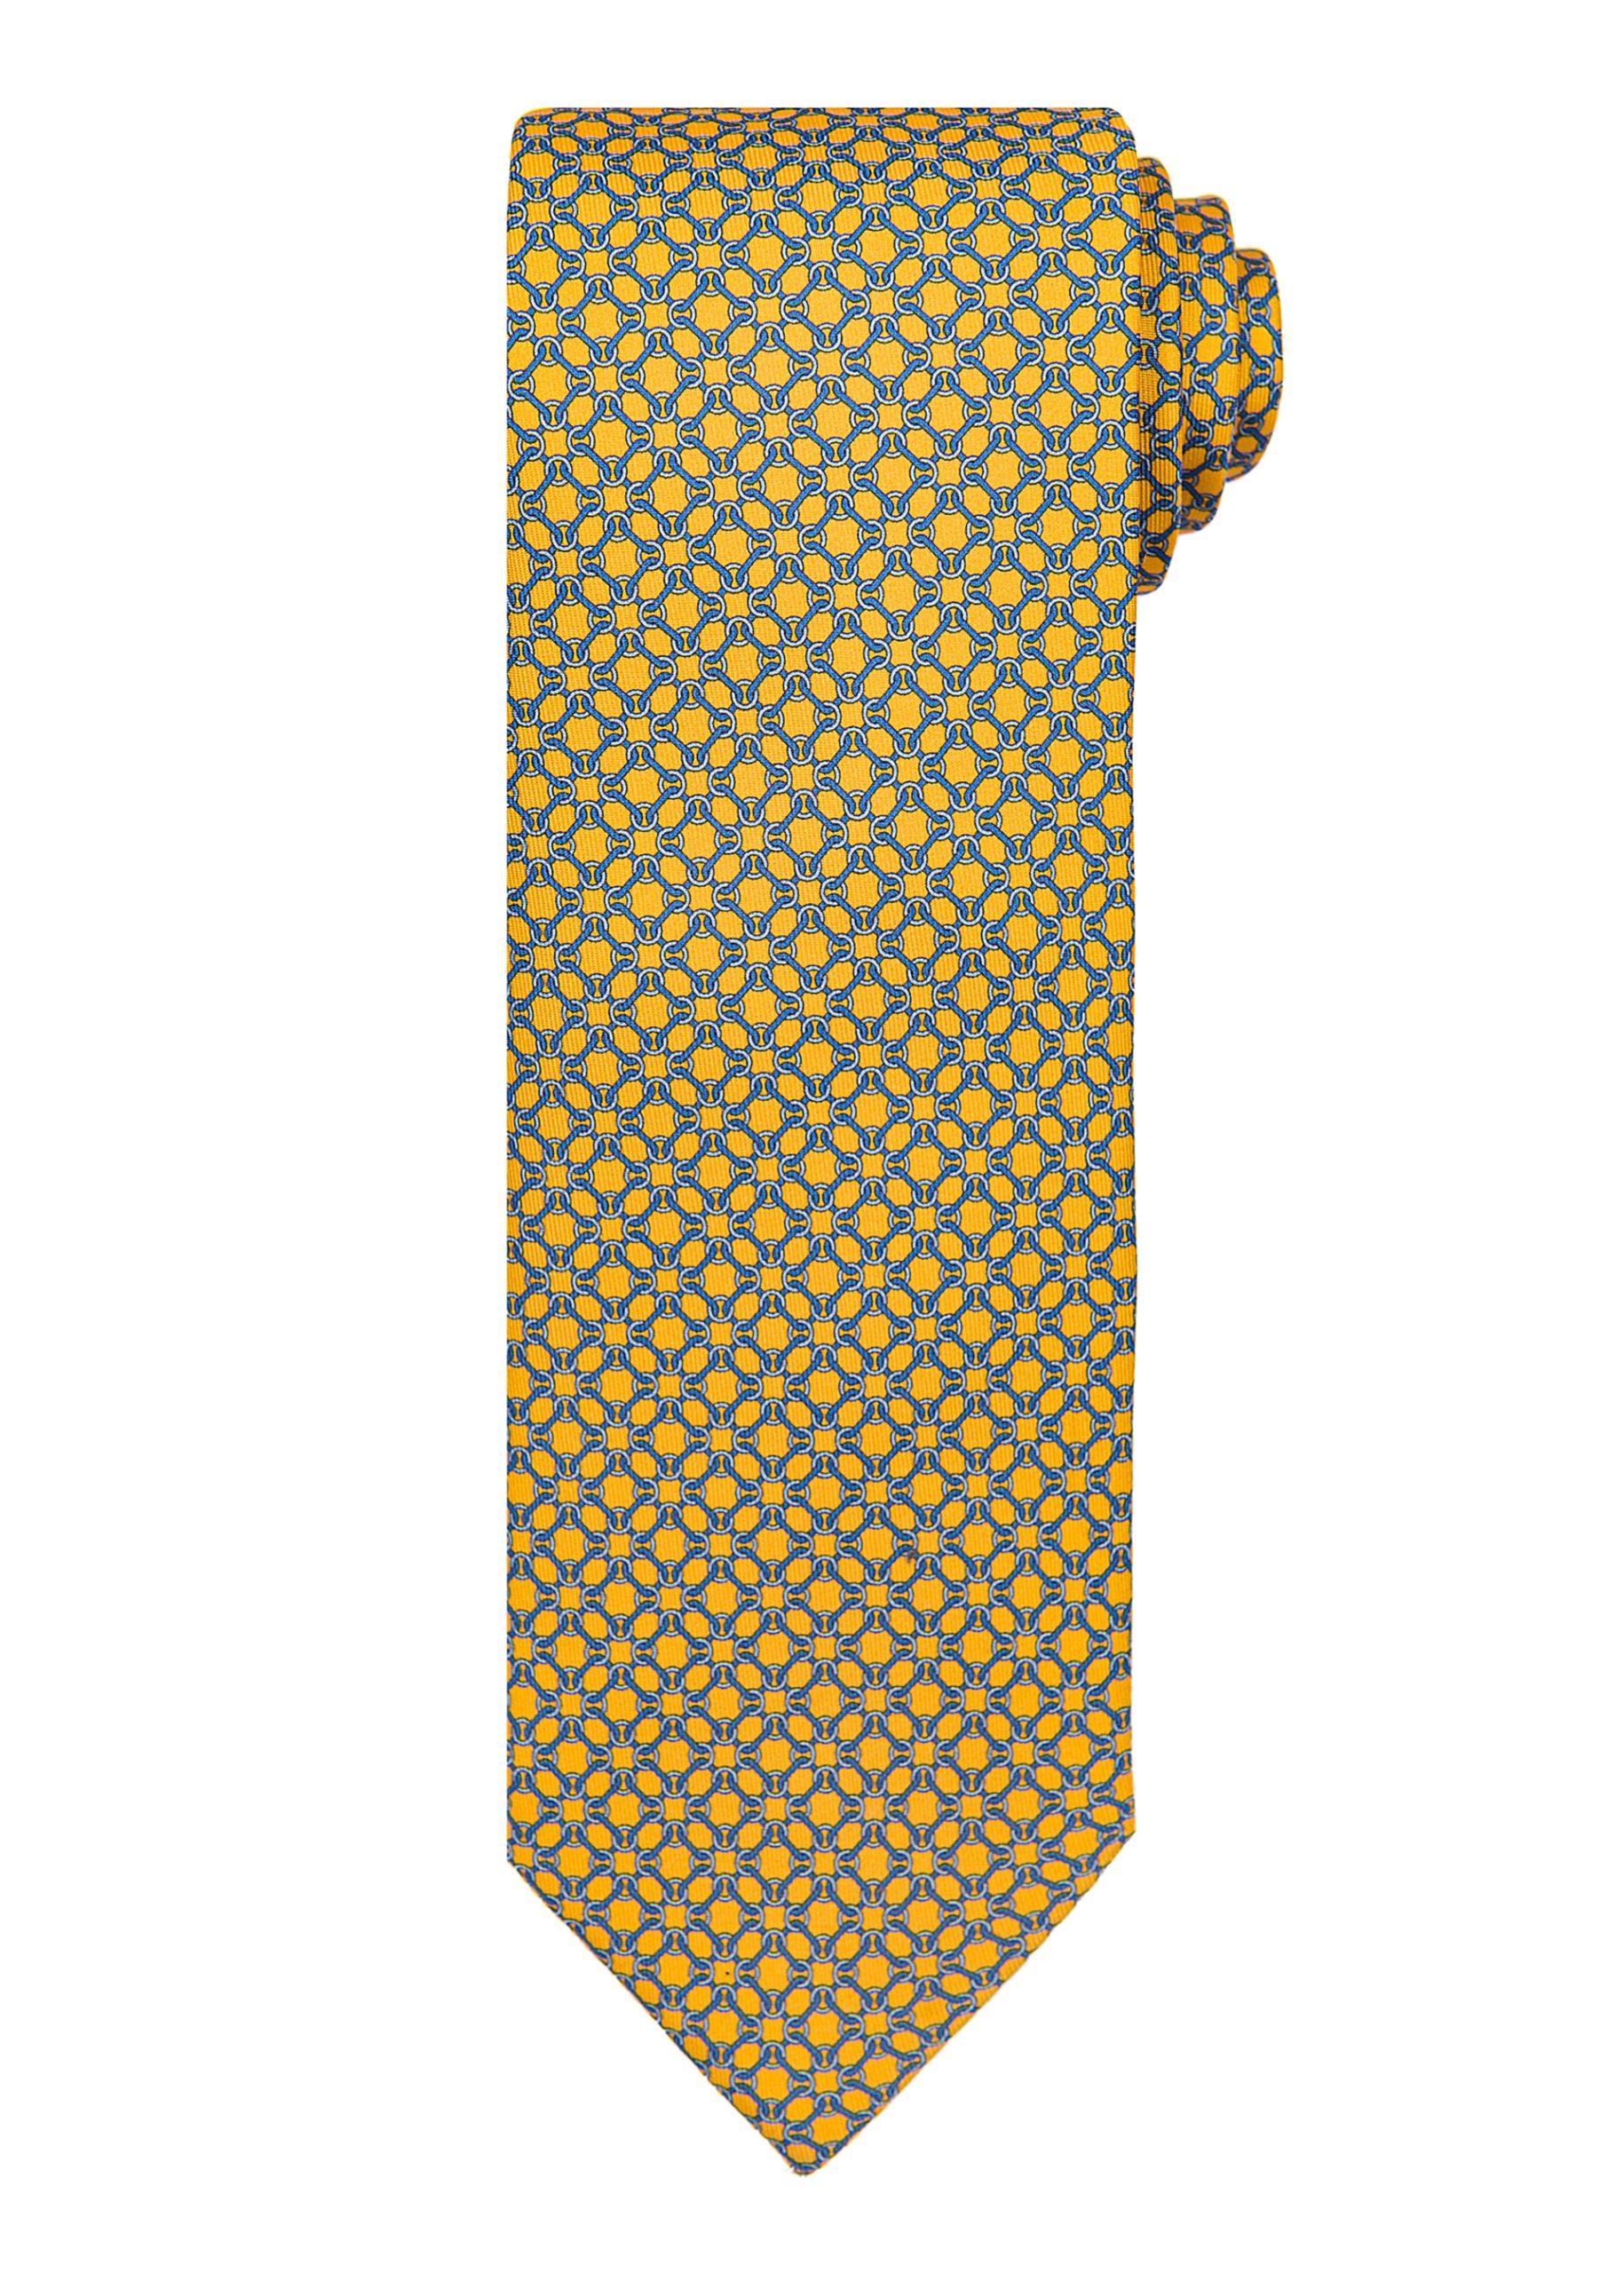 Men’s yellow and blue tie